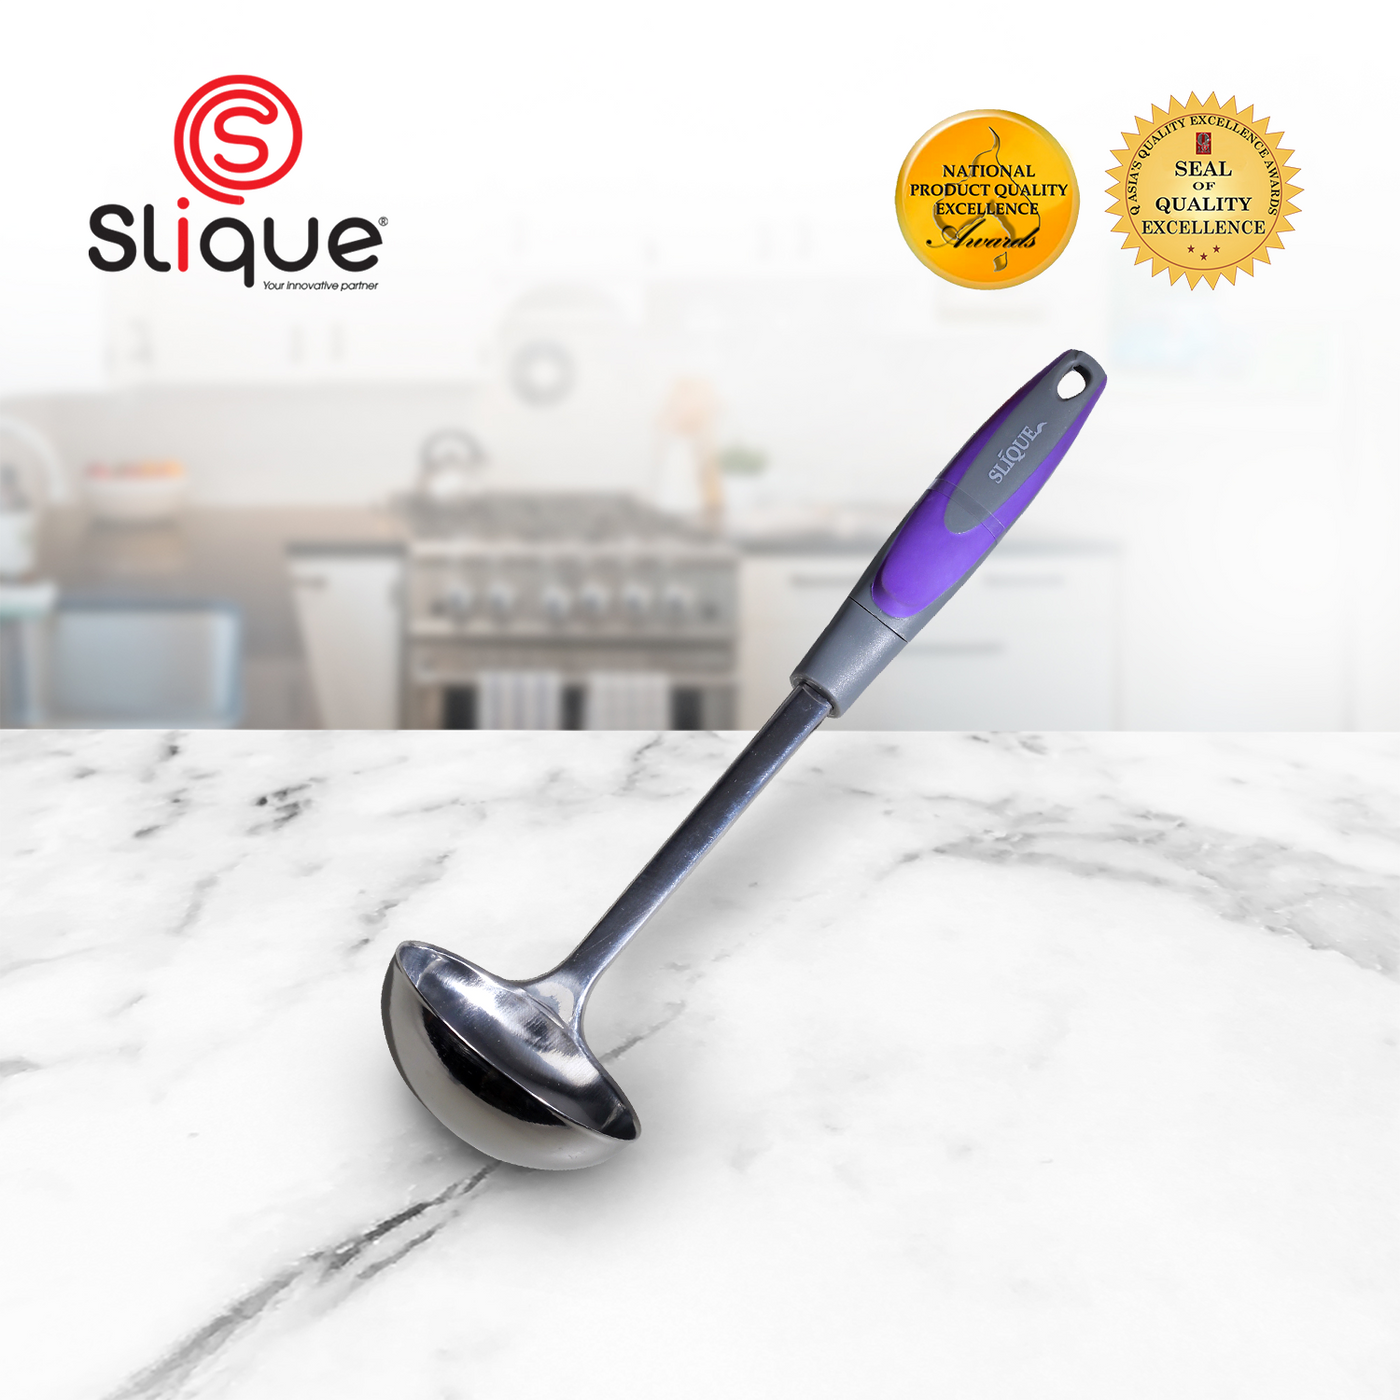 SLIQUE Premium 18/8 Stainless Steel Ladle TPR Silicone Handle Kitchen Essentials Amazing Gift Idea For Any Occasion! (Purple)